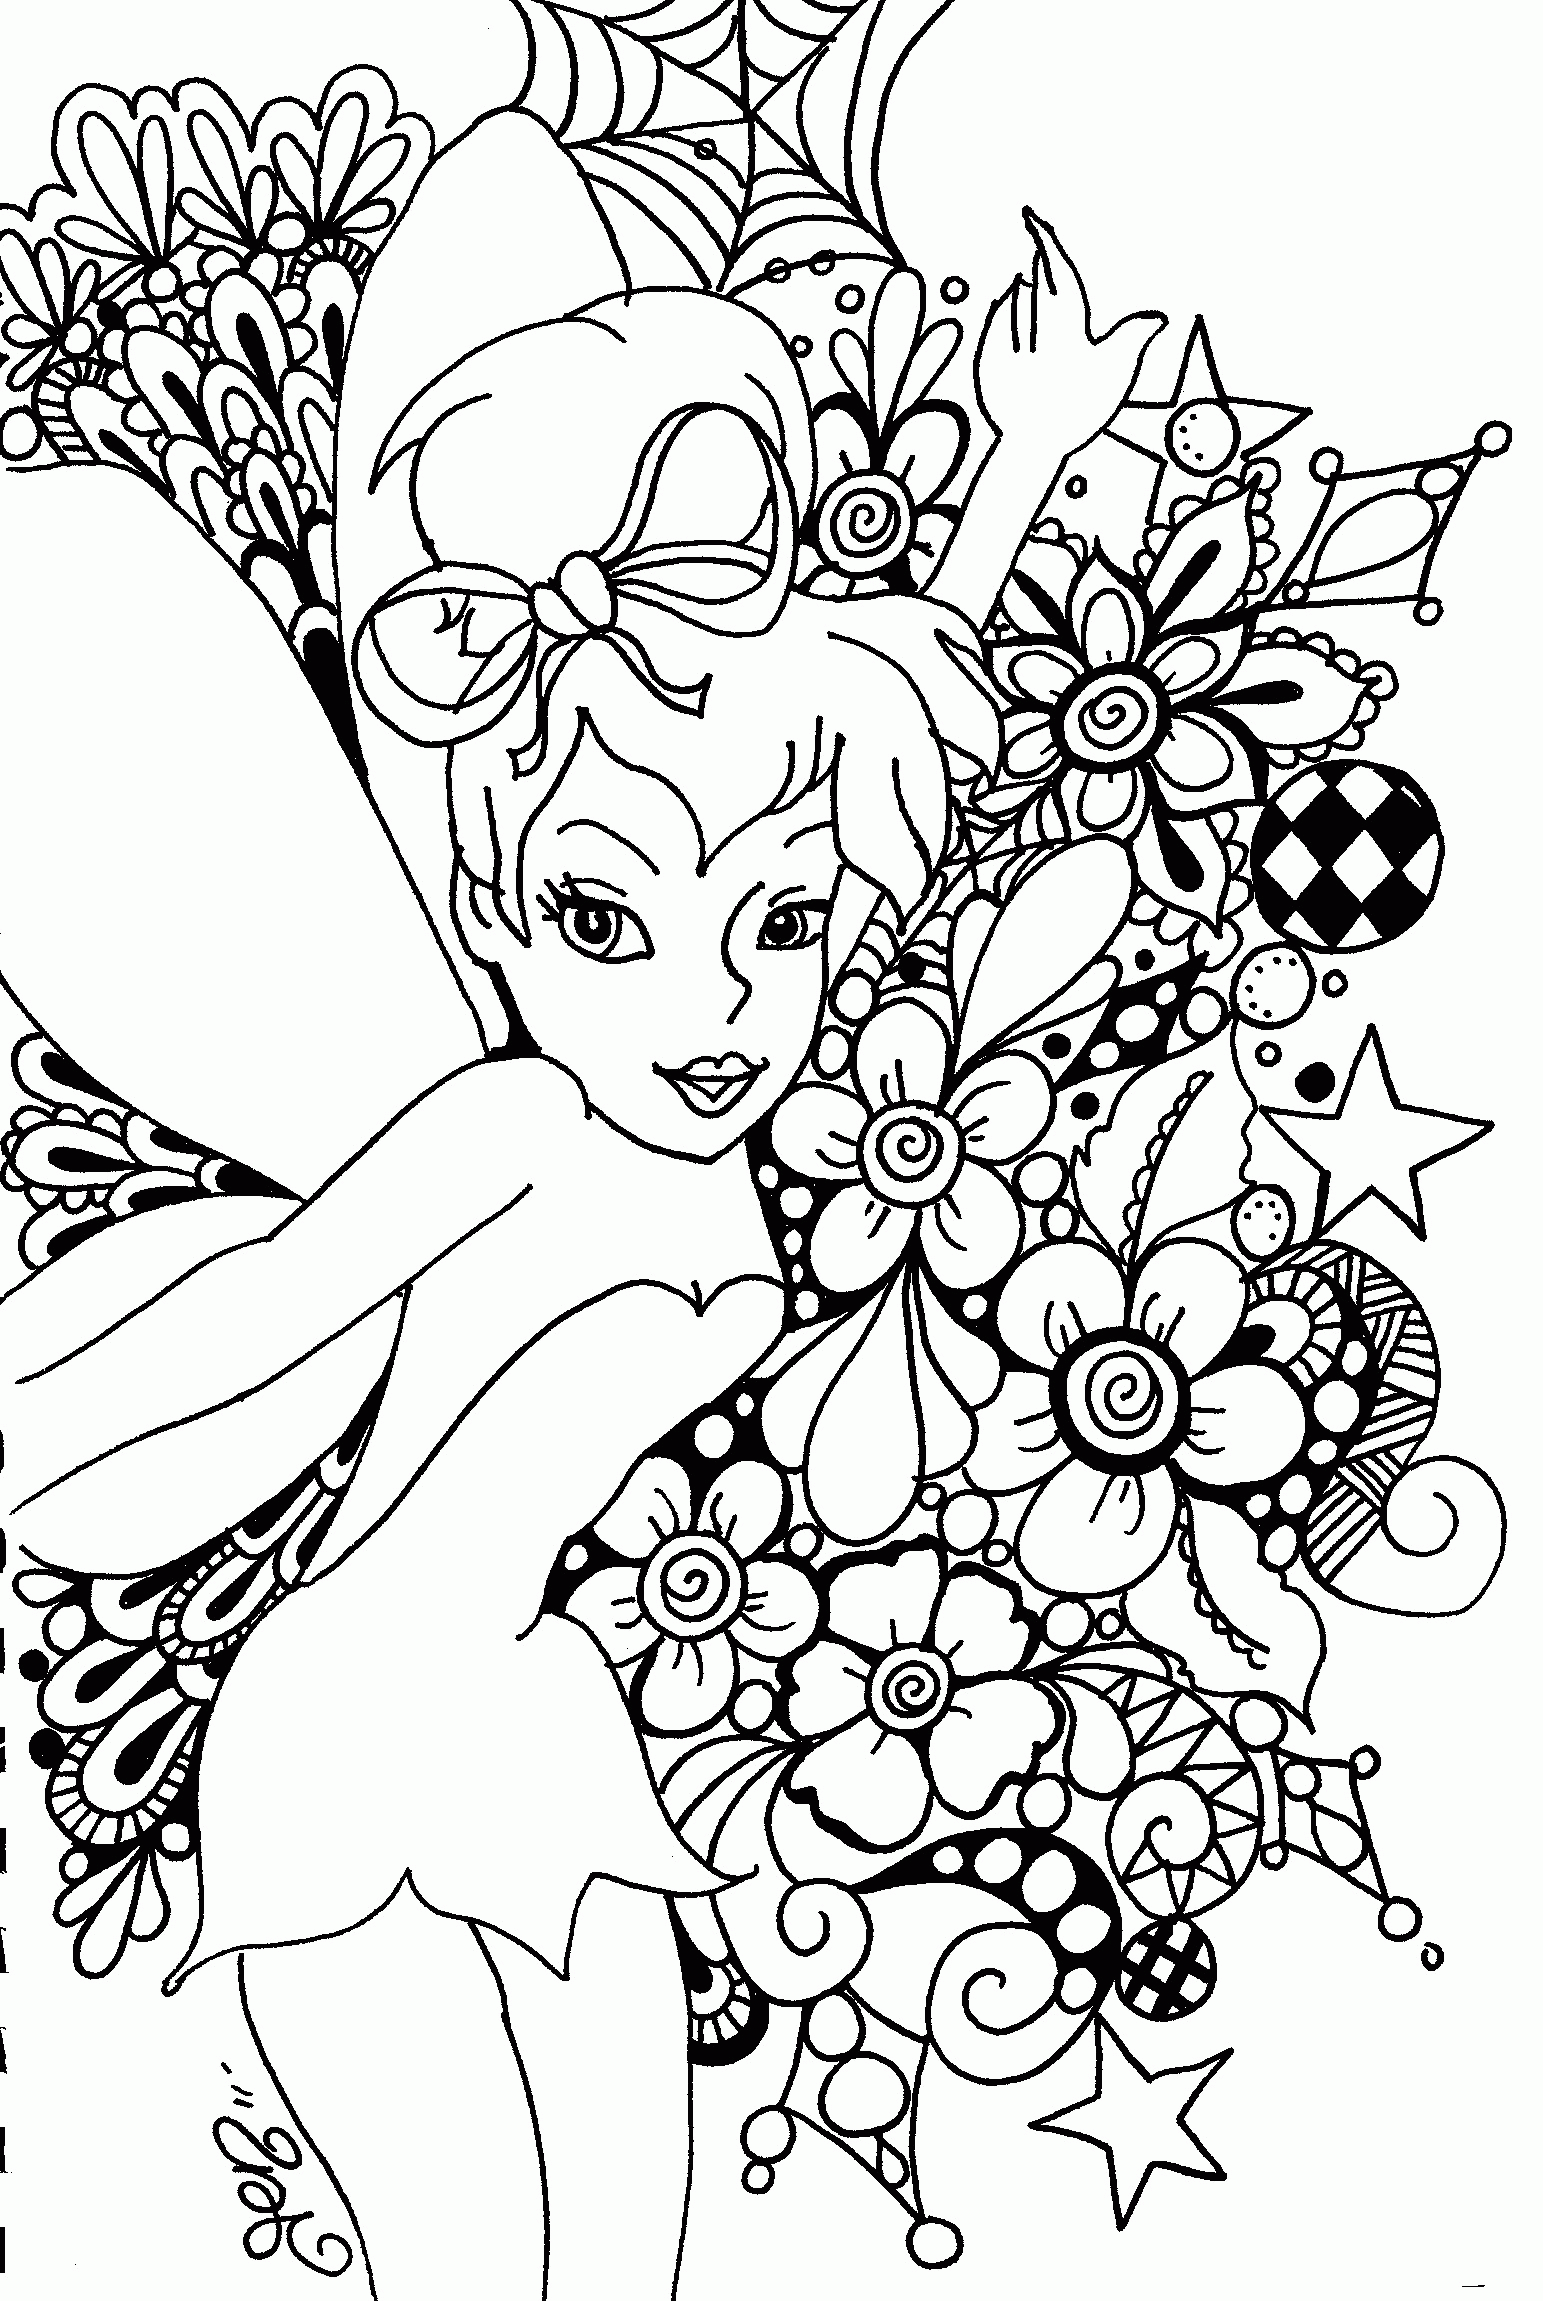 Coloring pages online free printable | www.veupropia.org